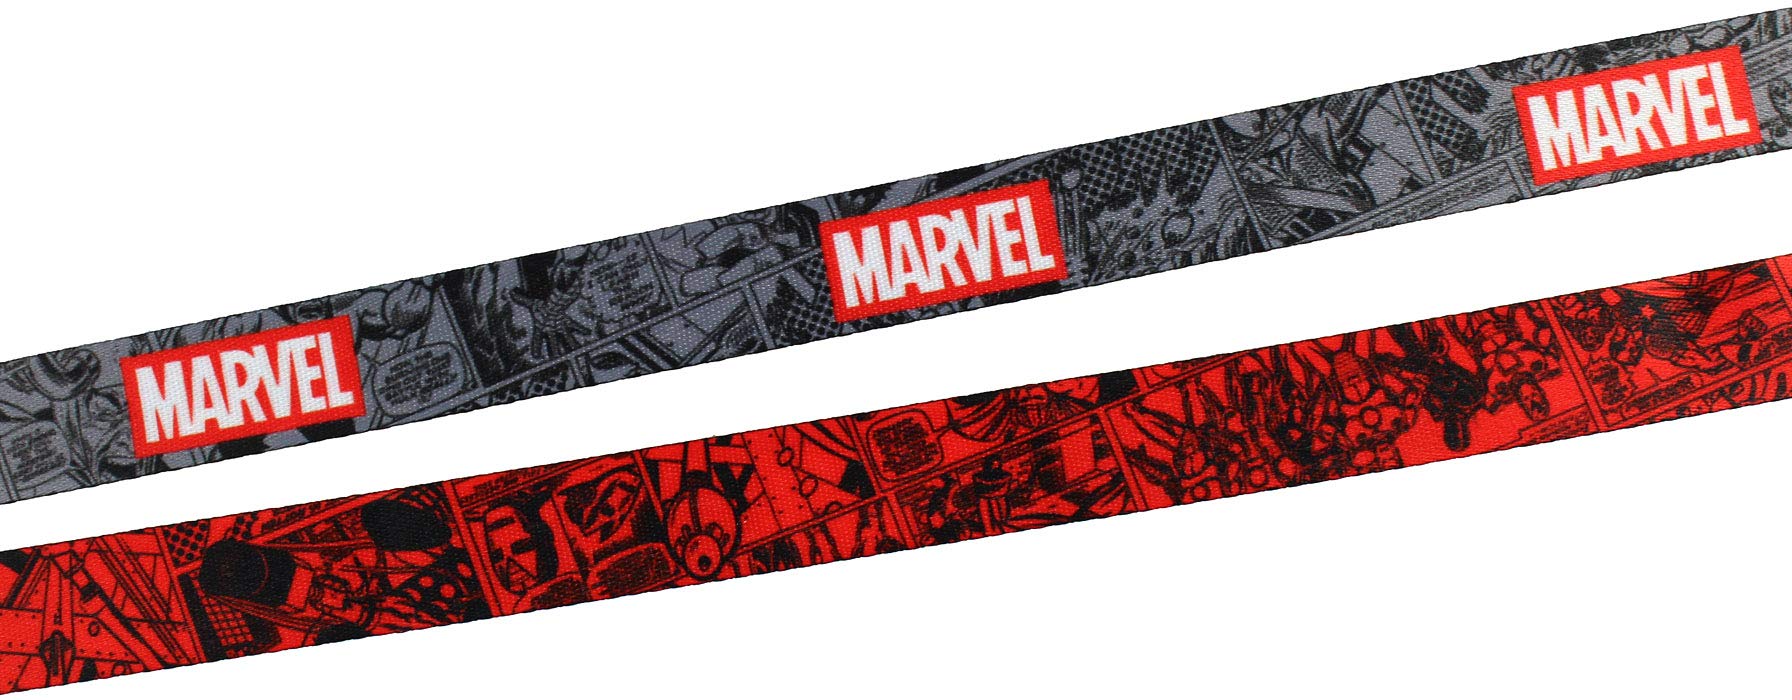 Marvel Lanyard ID Badge Holder, 2" Rubber Charm Pendant with Raised Script and 2 Sided Vintage Comic Strip Pattern